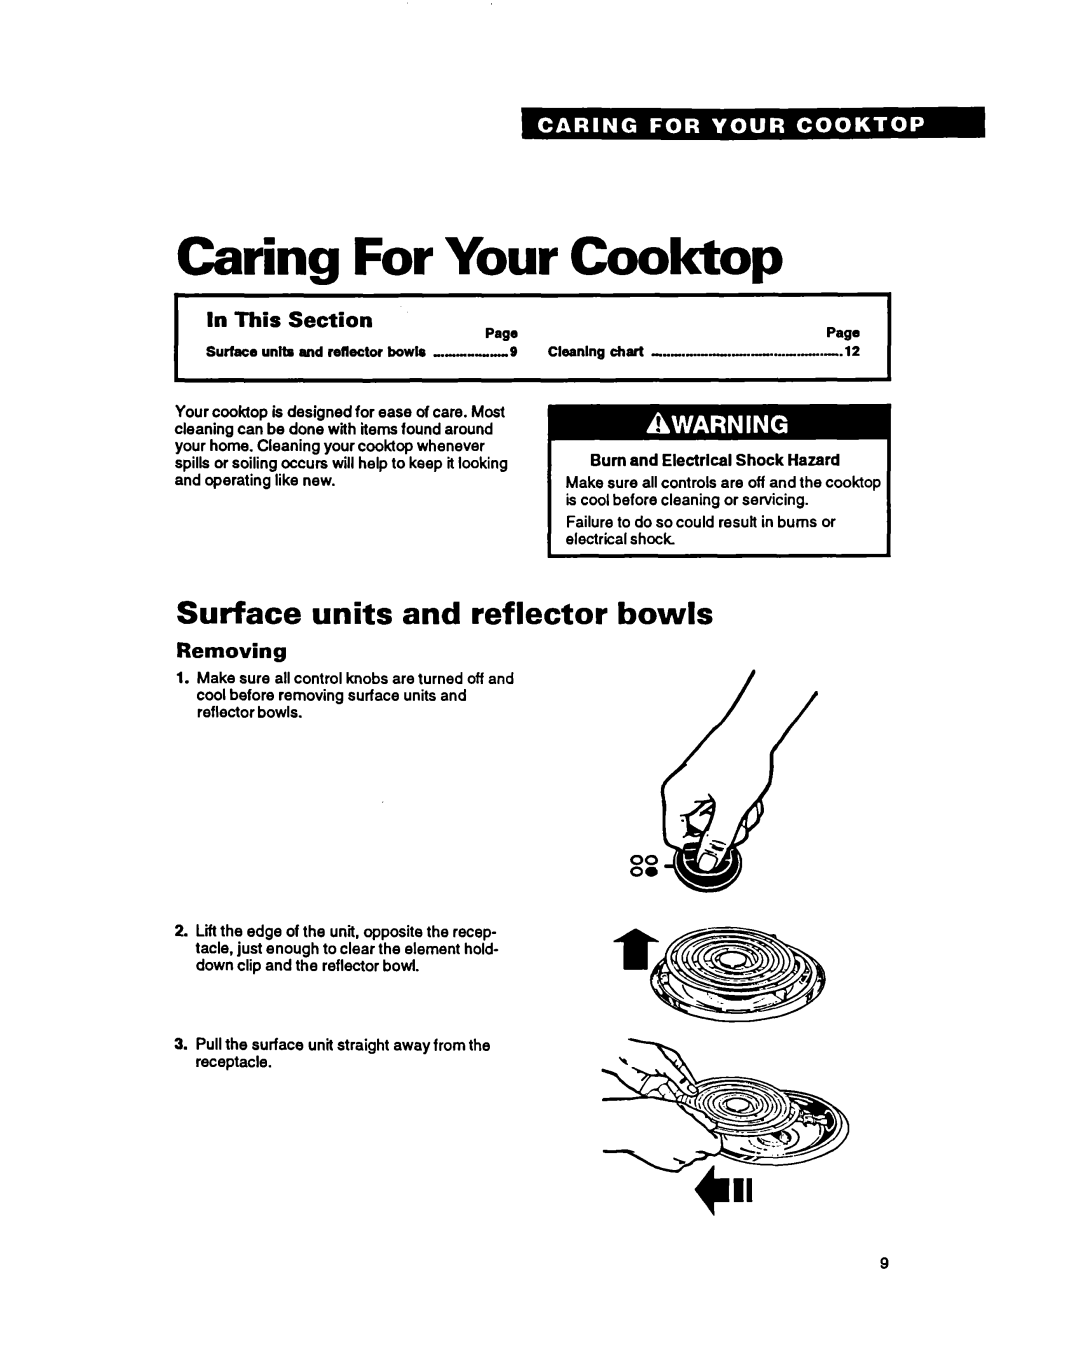 Whirlpool RC8200XY, RC8400XY Caring For Your Cooktop, Surface units and reflector bowls, In This Section, Removing 